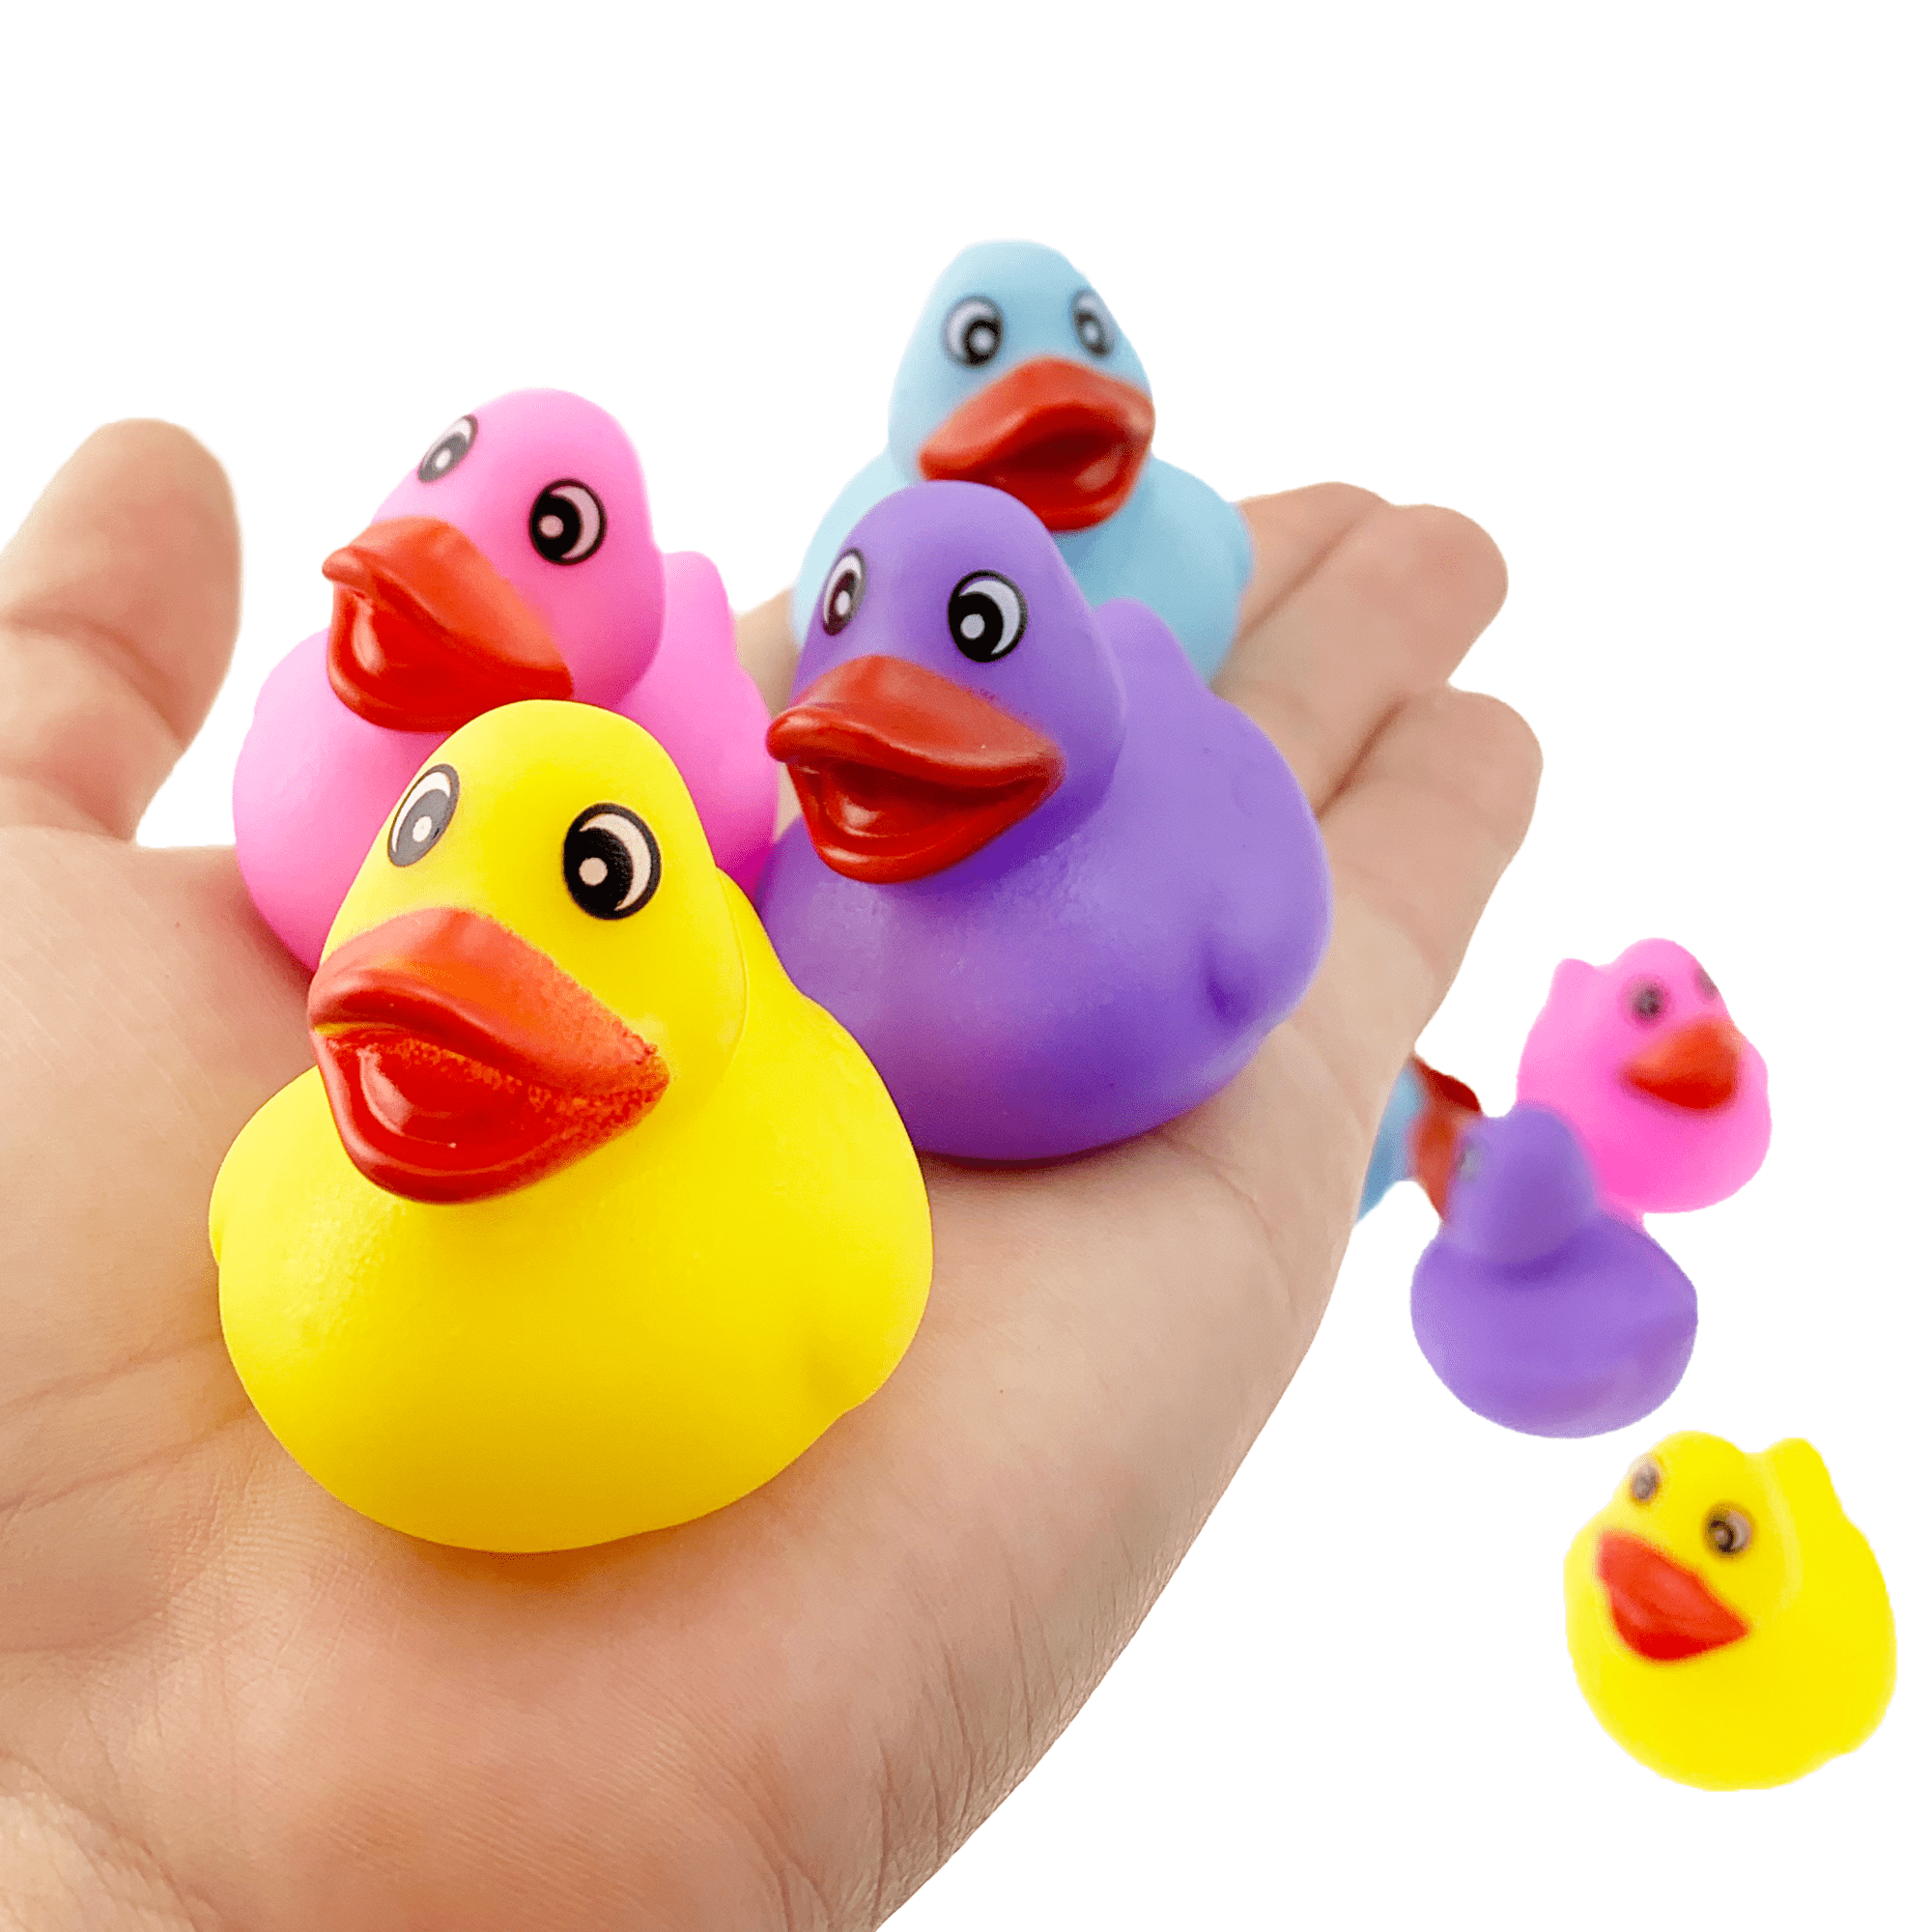 Birthdays Bath Time and More Fight Together 100 Pack Rubber Duck Bath Toy Assortment Bulk Floater Duck for Kids Party Favors Baby Showers Accessories 100-Pack